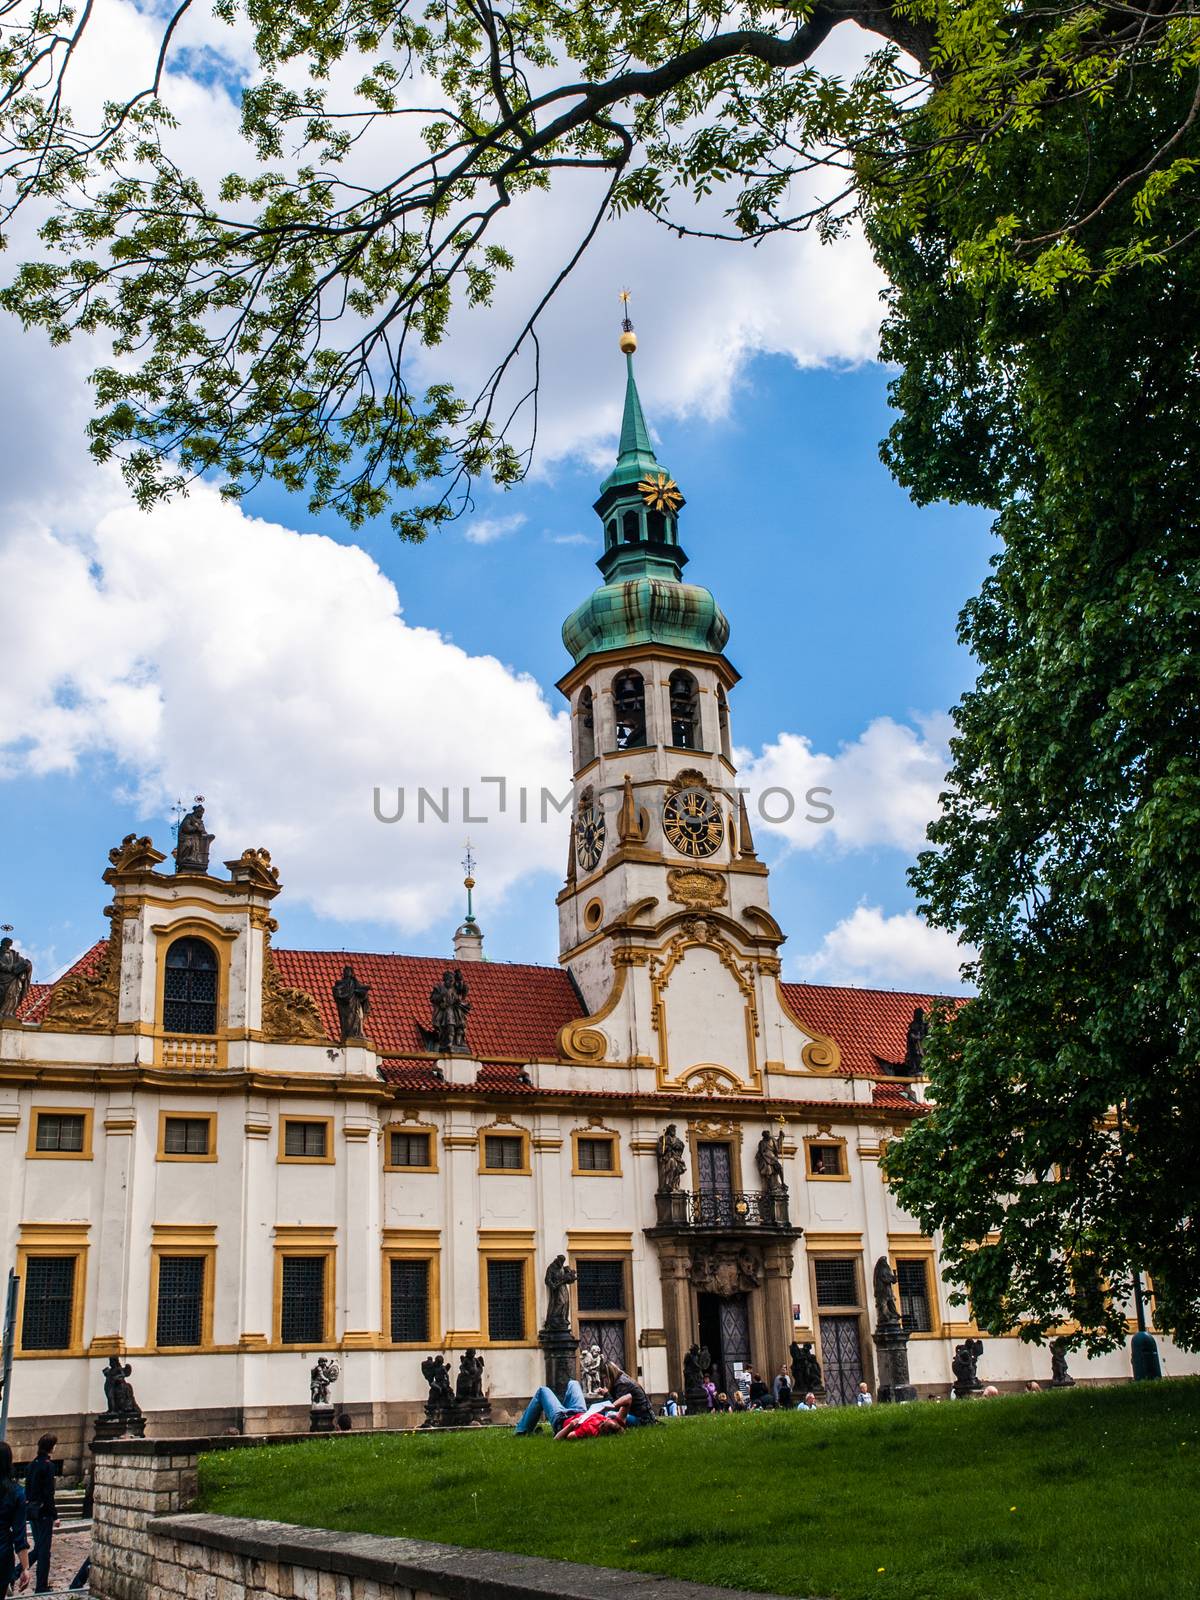 The Prague Loreto - remarkable Baroque historic monument and place of pilgrimage with captivating history